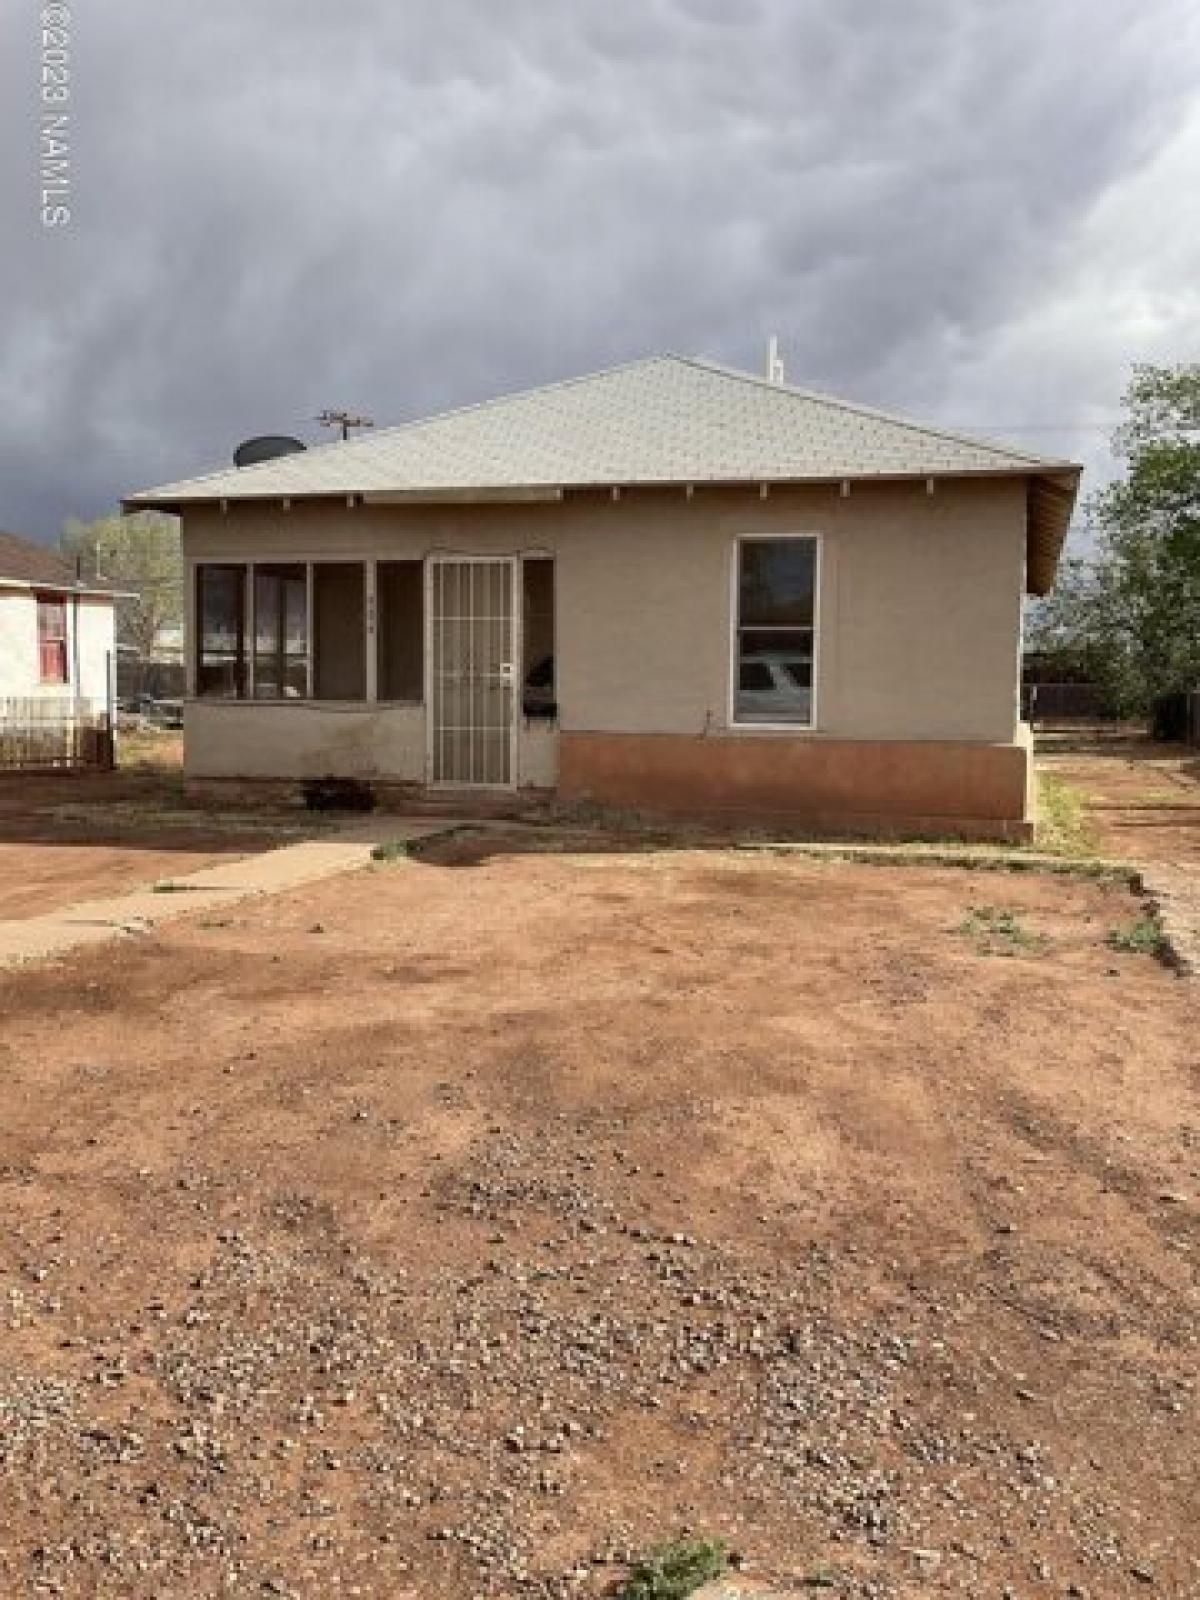 Picture of Home For Sale in Winslow, Arizona, United States